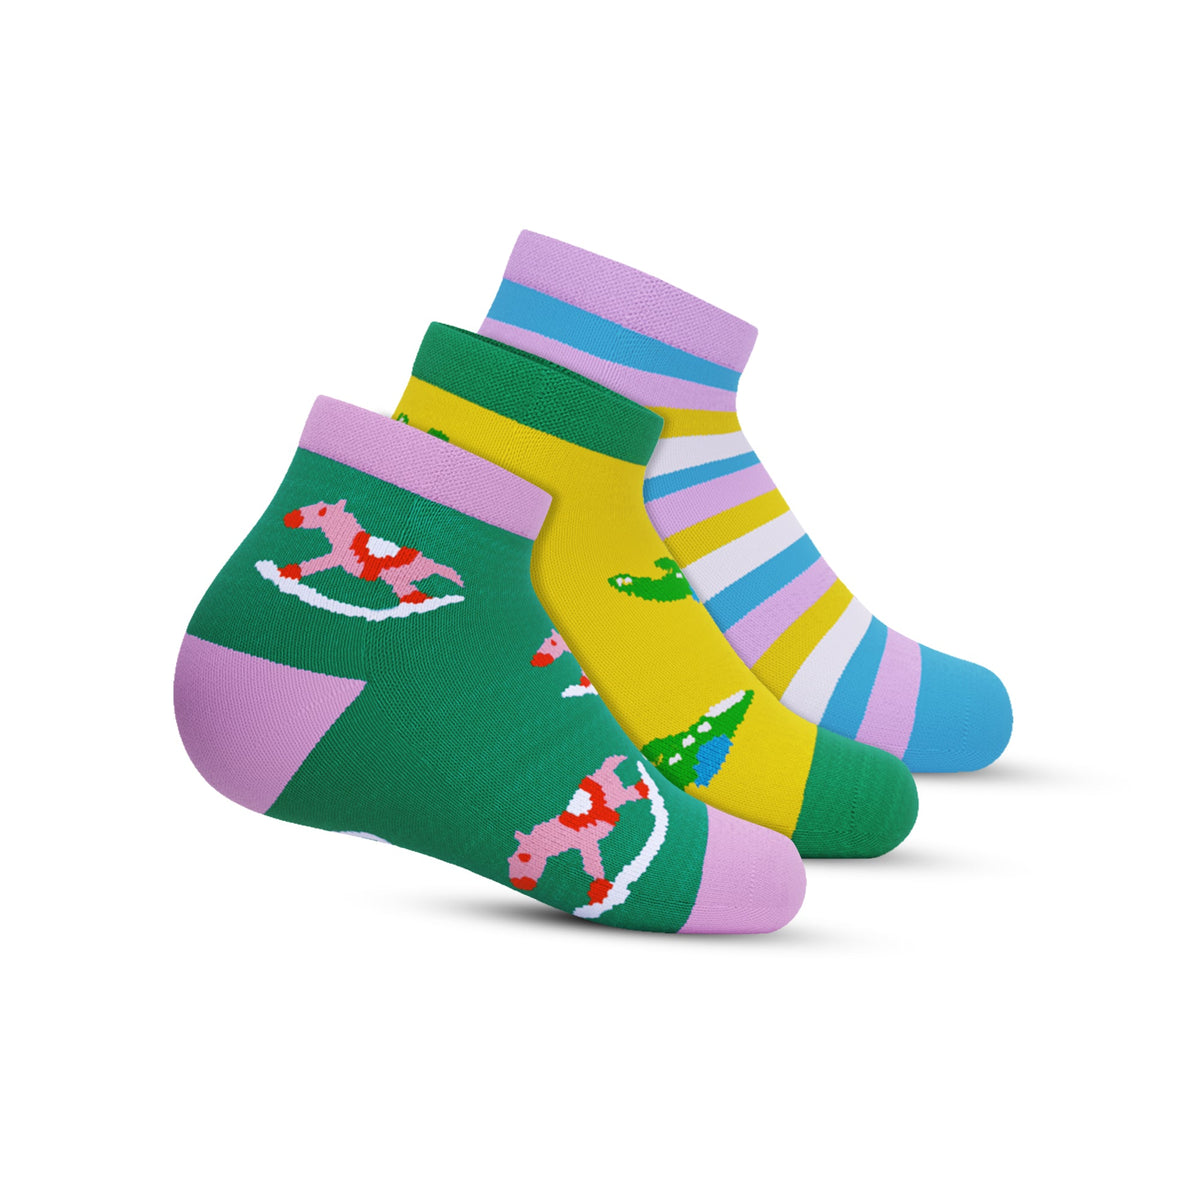 Ankle - play time - Green, take off - Yellow, hide seek - Pink - Pack of 3